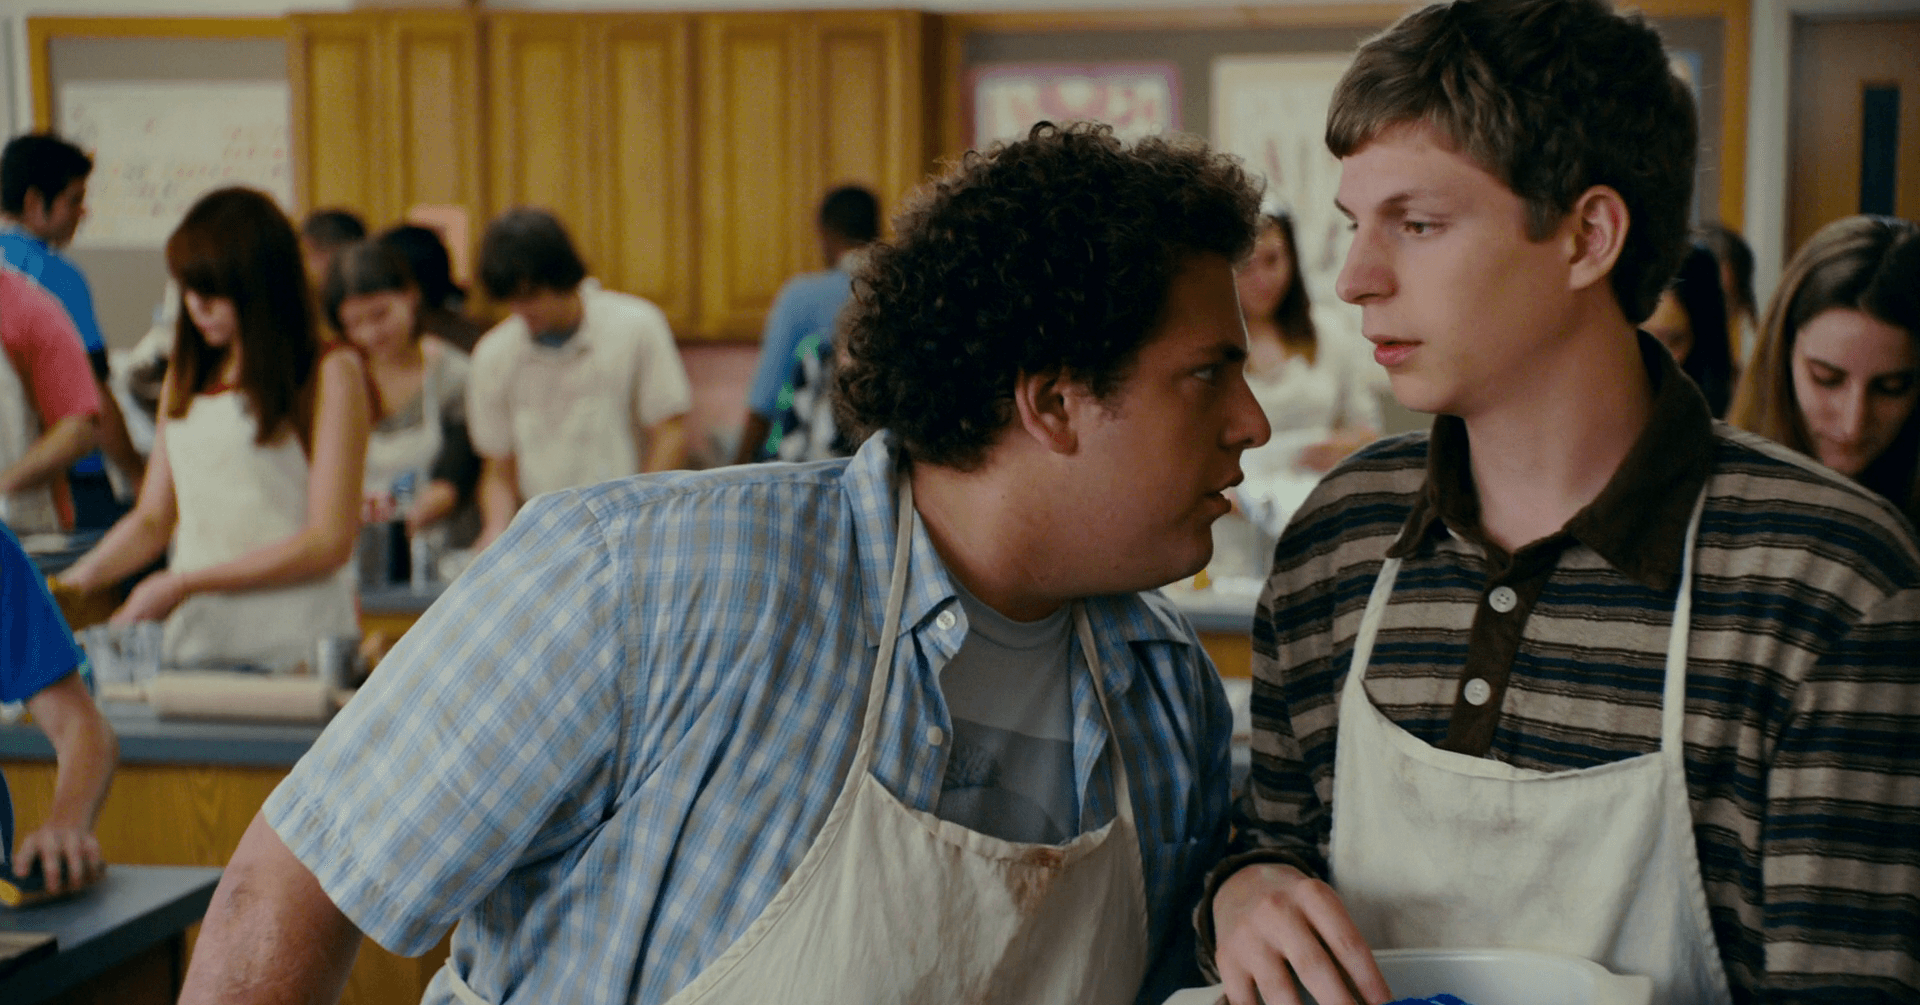 Superbad': Behind The Scenes Stories From The Set